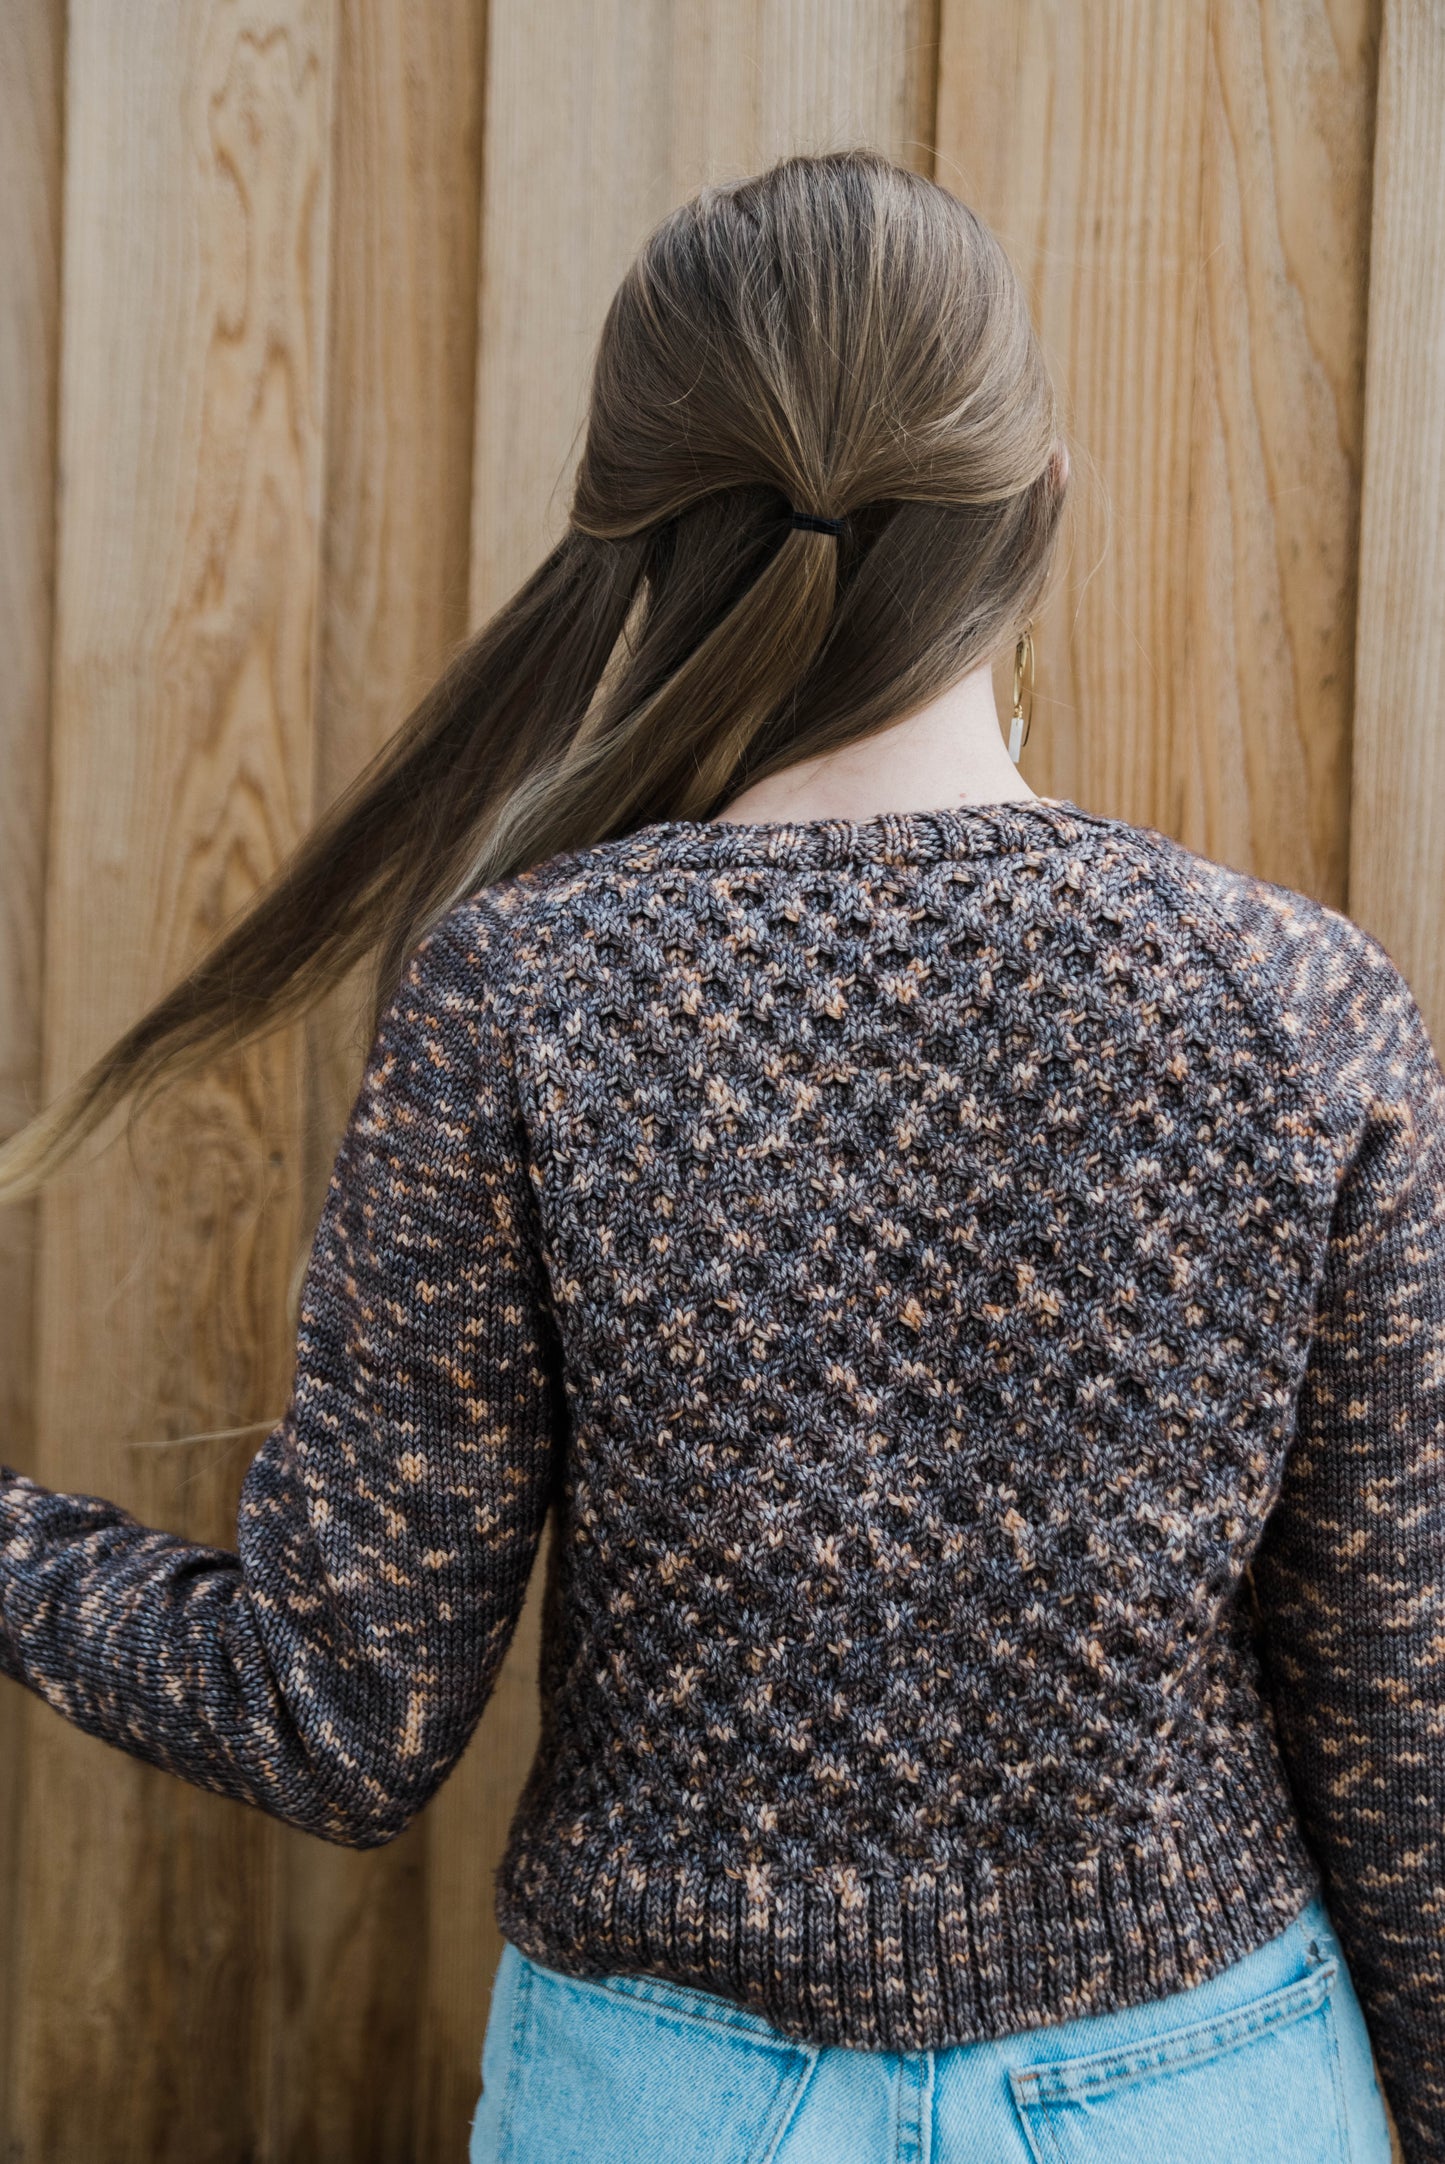 Haley adjusts her blonde hair, seen from behind. She wears a variegated brown sweater, knit with a honeycomb pattern on the torso, with blue jeans.